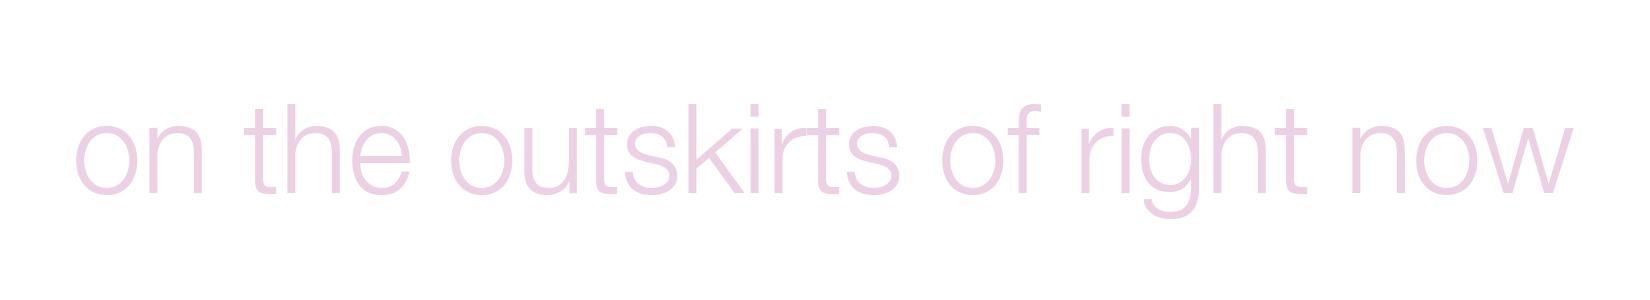 outskirts title banner 30pt